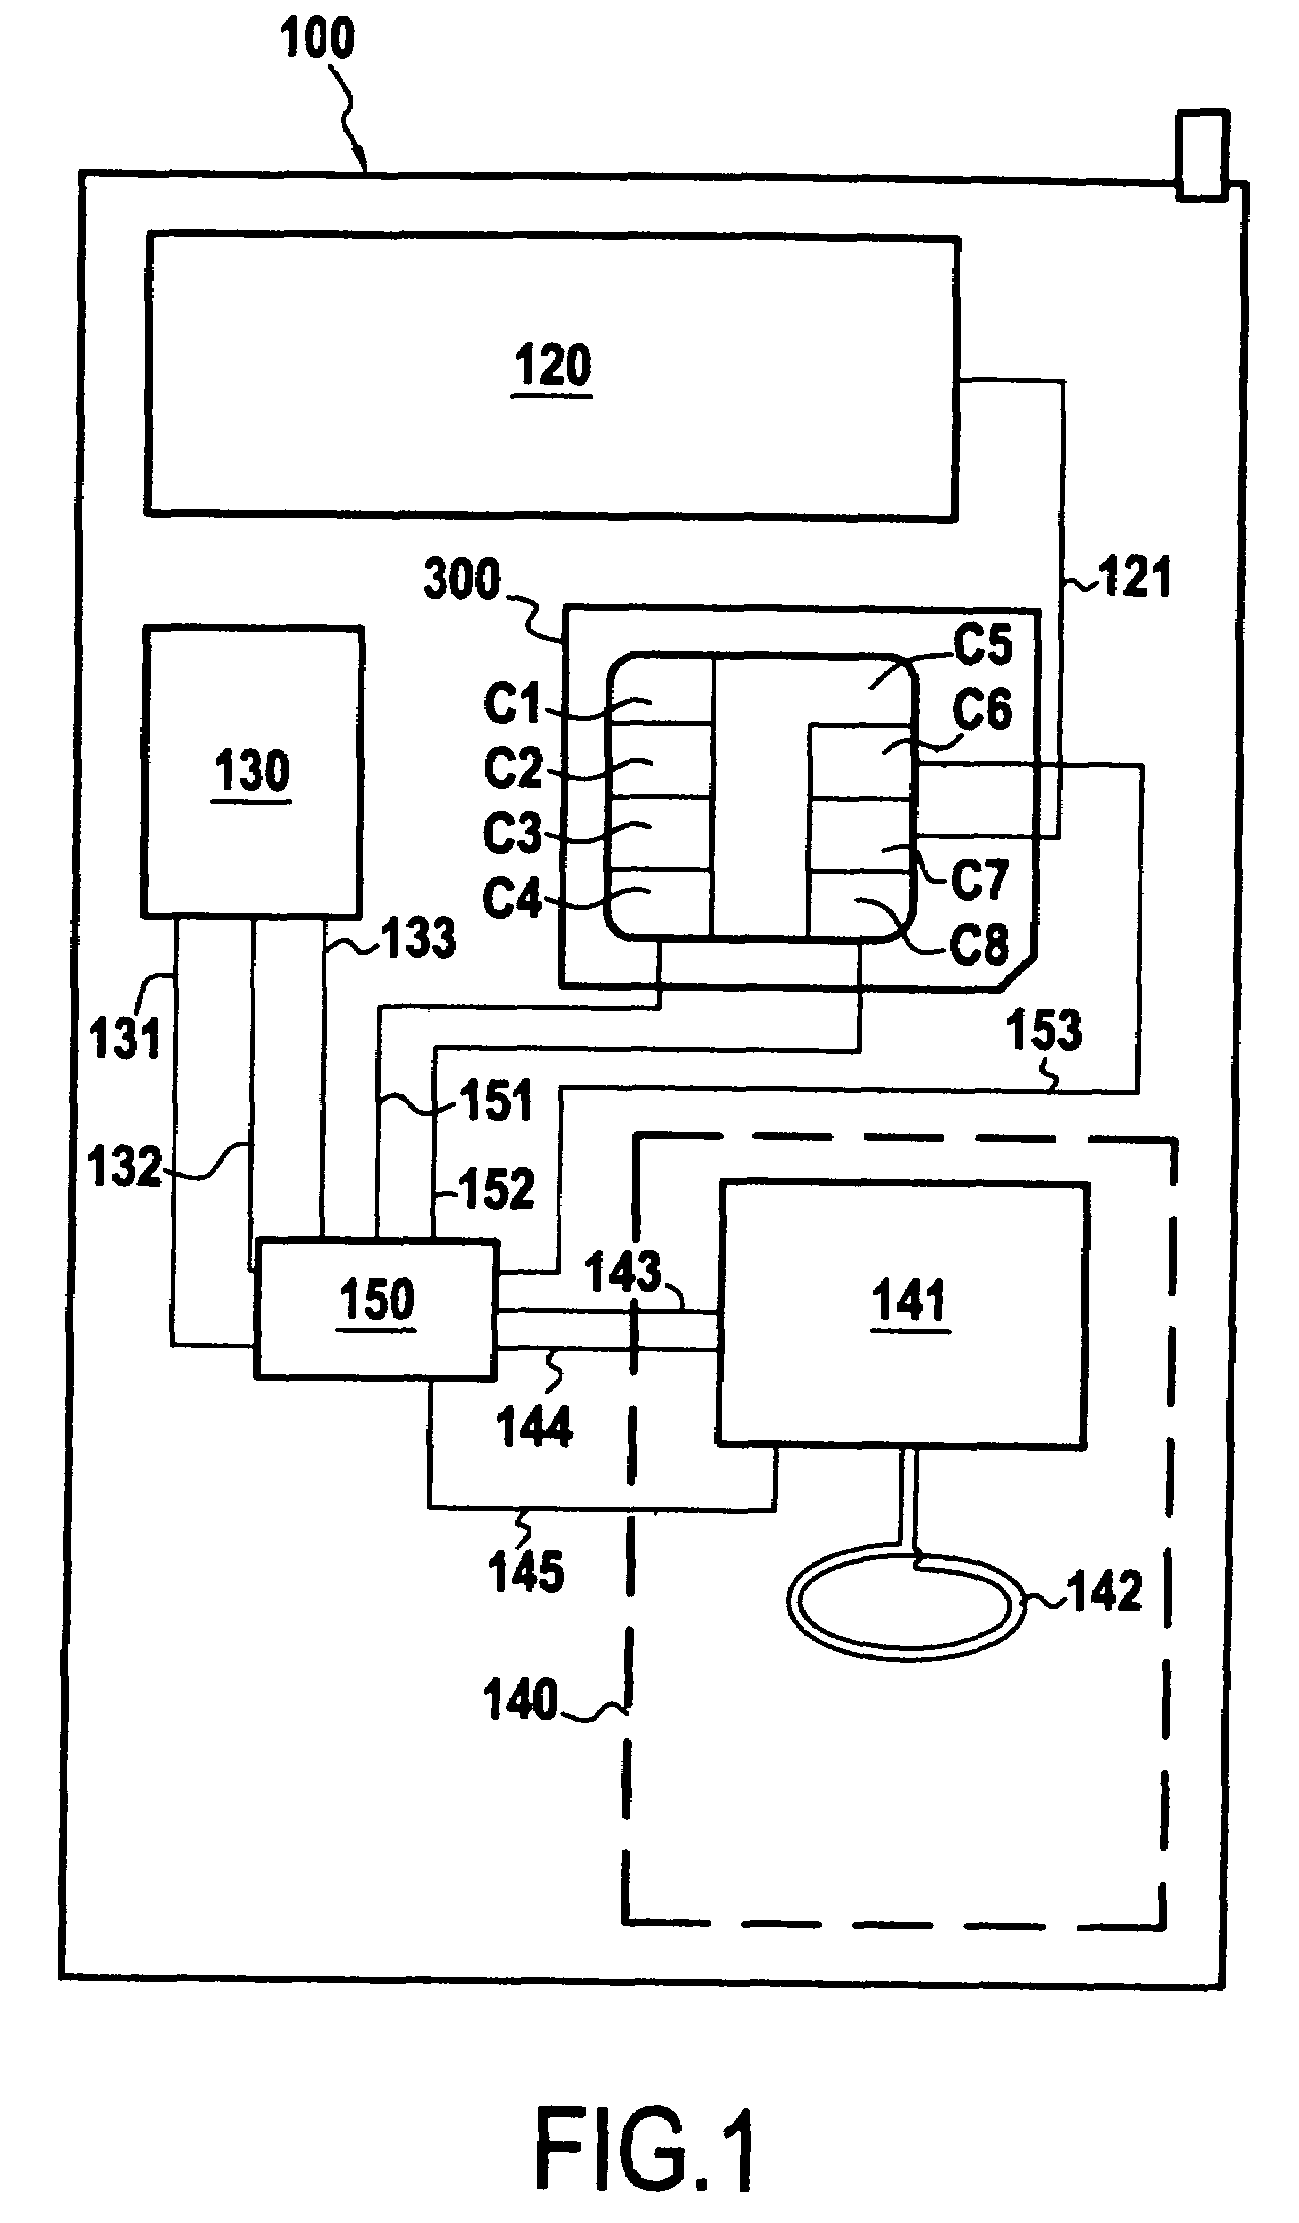 Method of dynamically allocating contacts of a subscriber chip in a mobile terminal, and corresponding subscriber chip card and mobile terminal